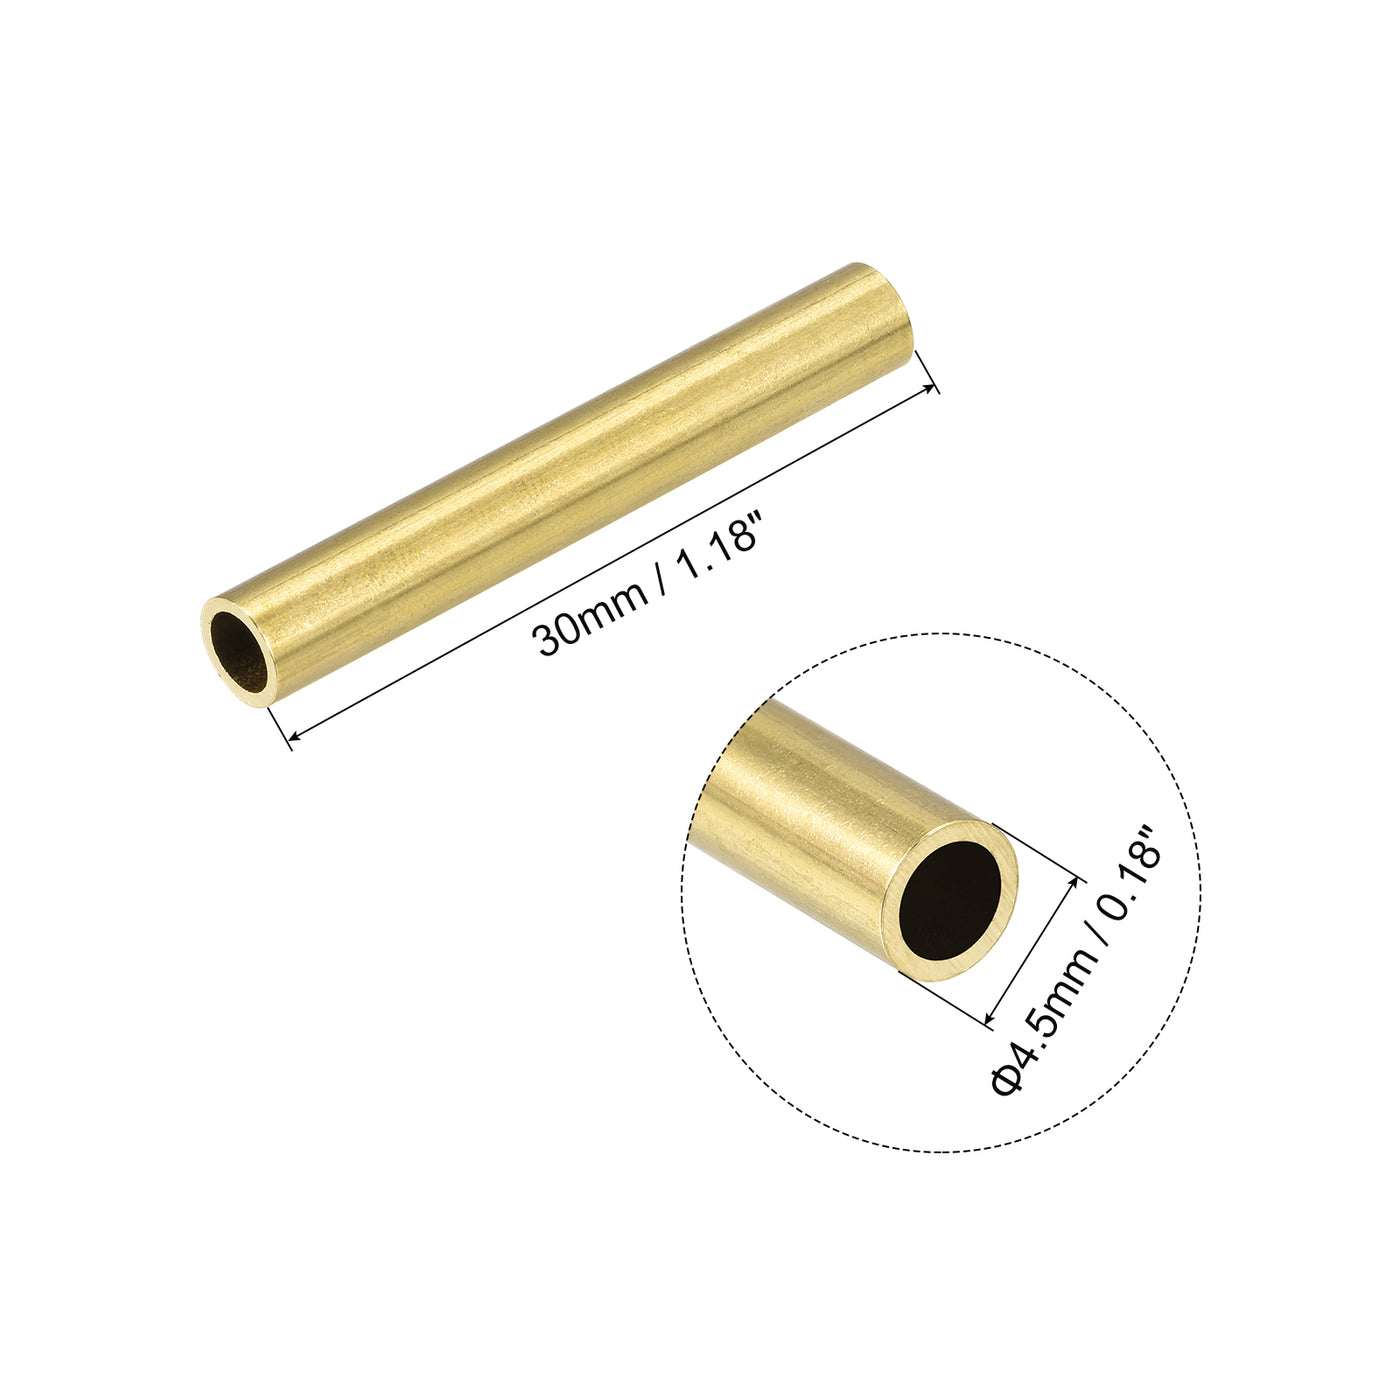 Uxcell Uxcell Brass Tube 4.5mm OD 0.5mm Wall Thickness 30mm Length Pipe Tubing for DIY 30 Pcs